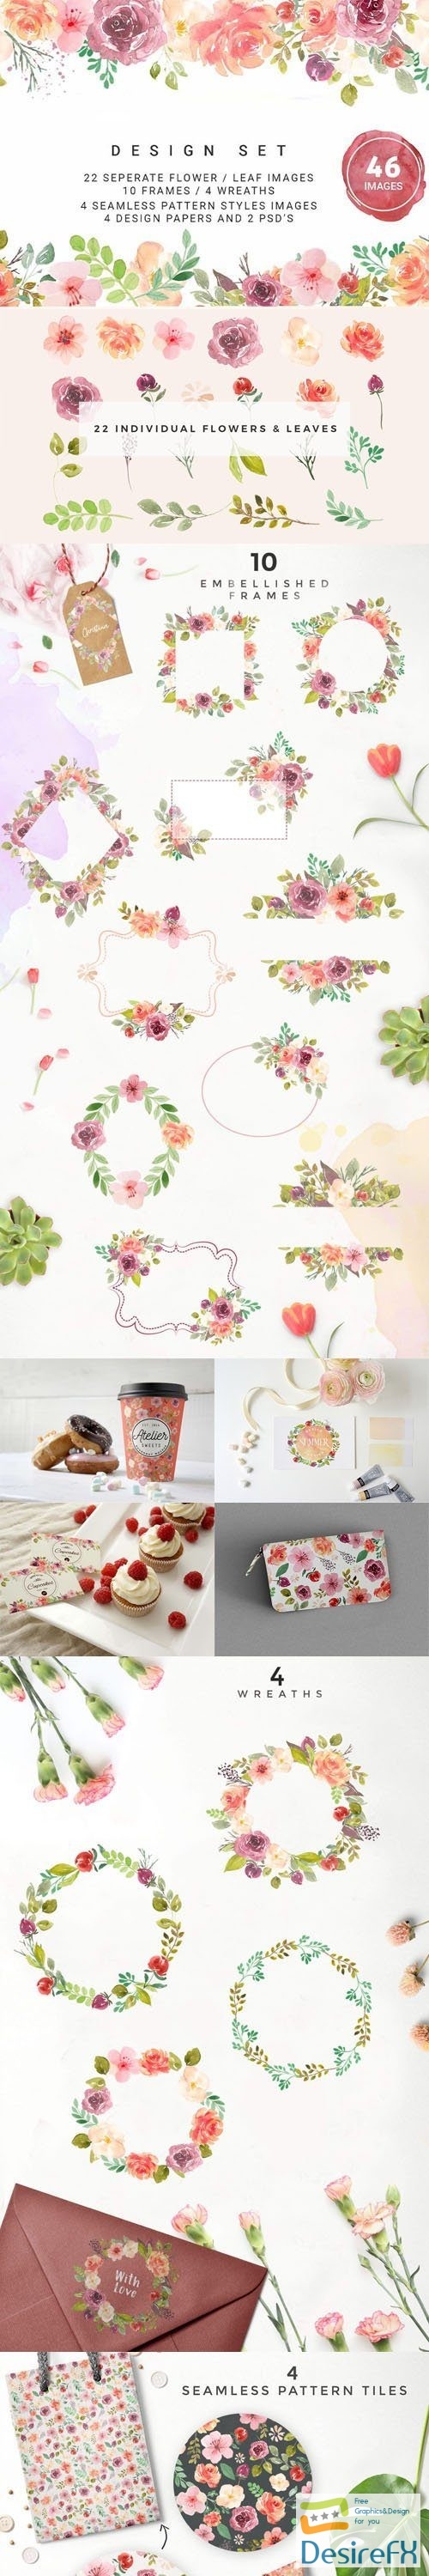 Amazing Set of Watercolor Elements PSD Templates